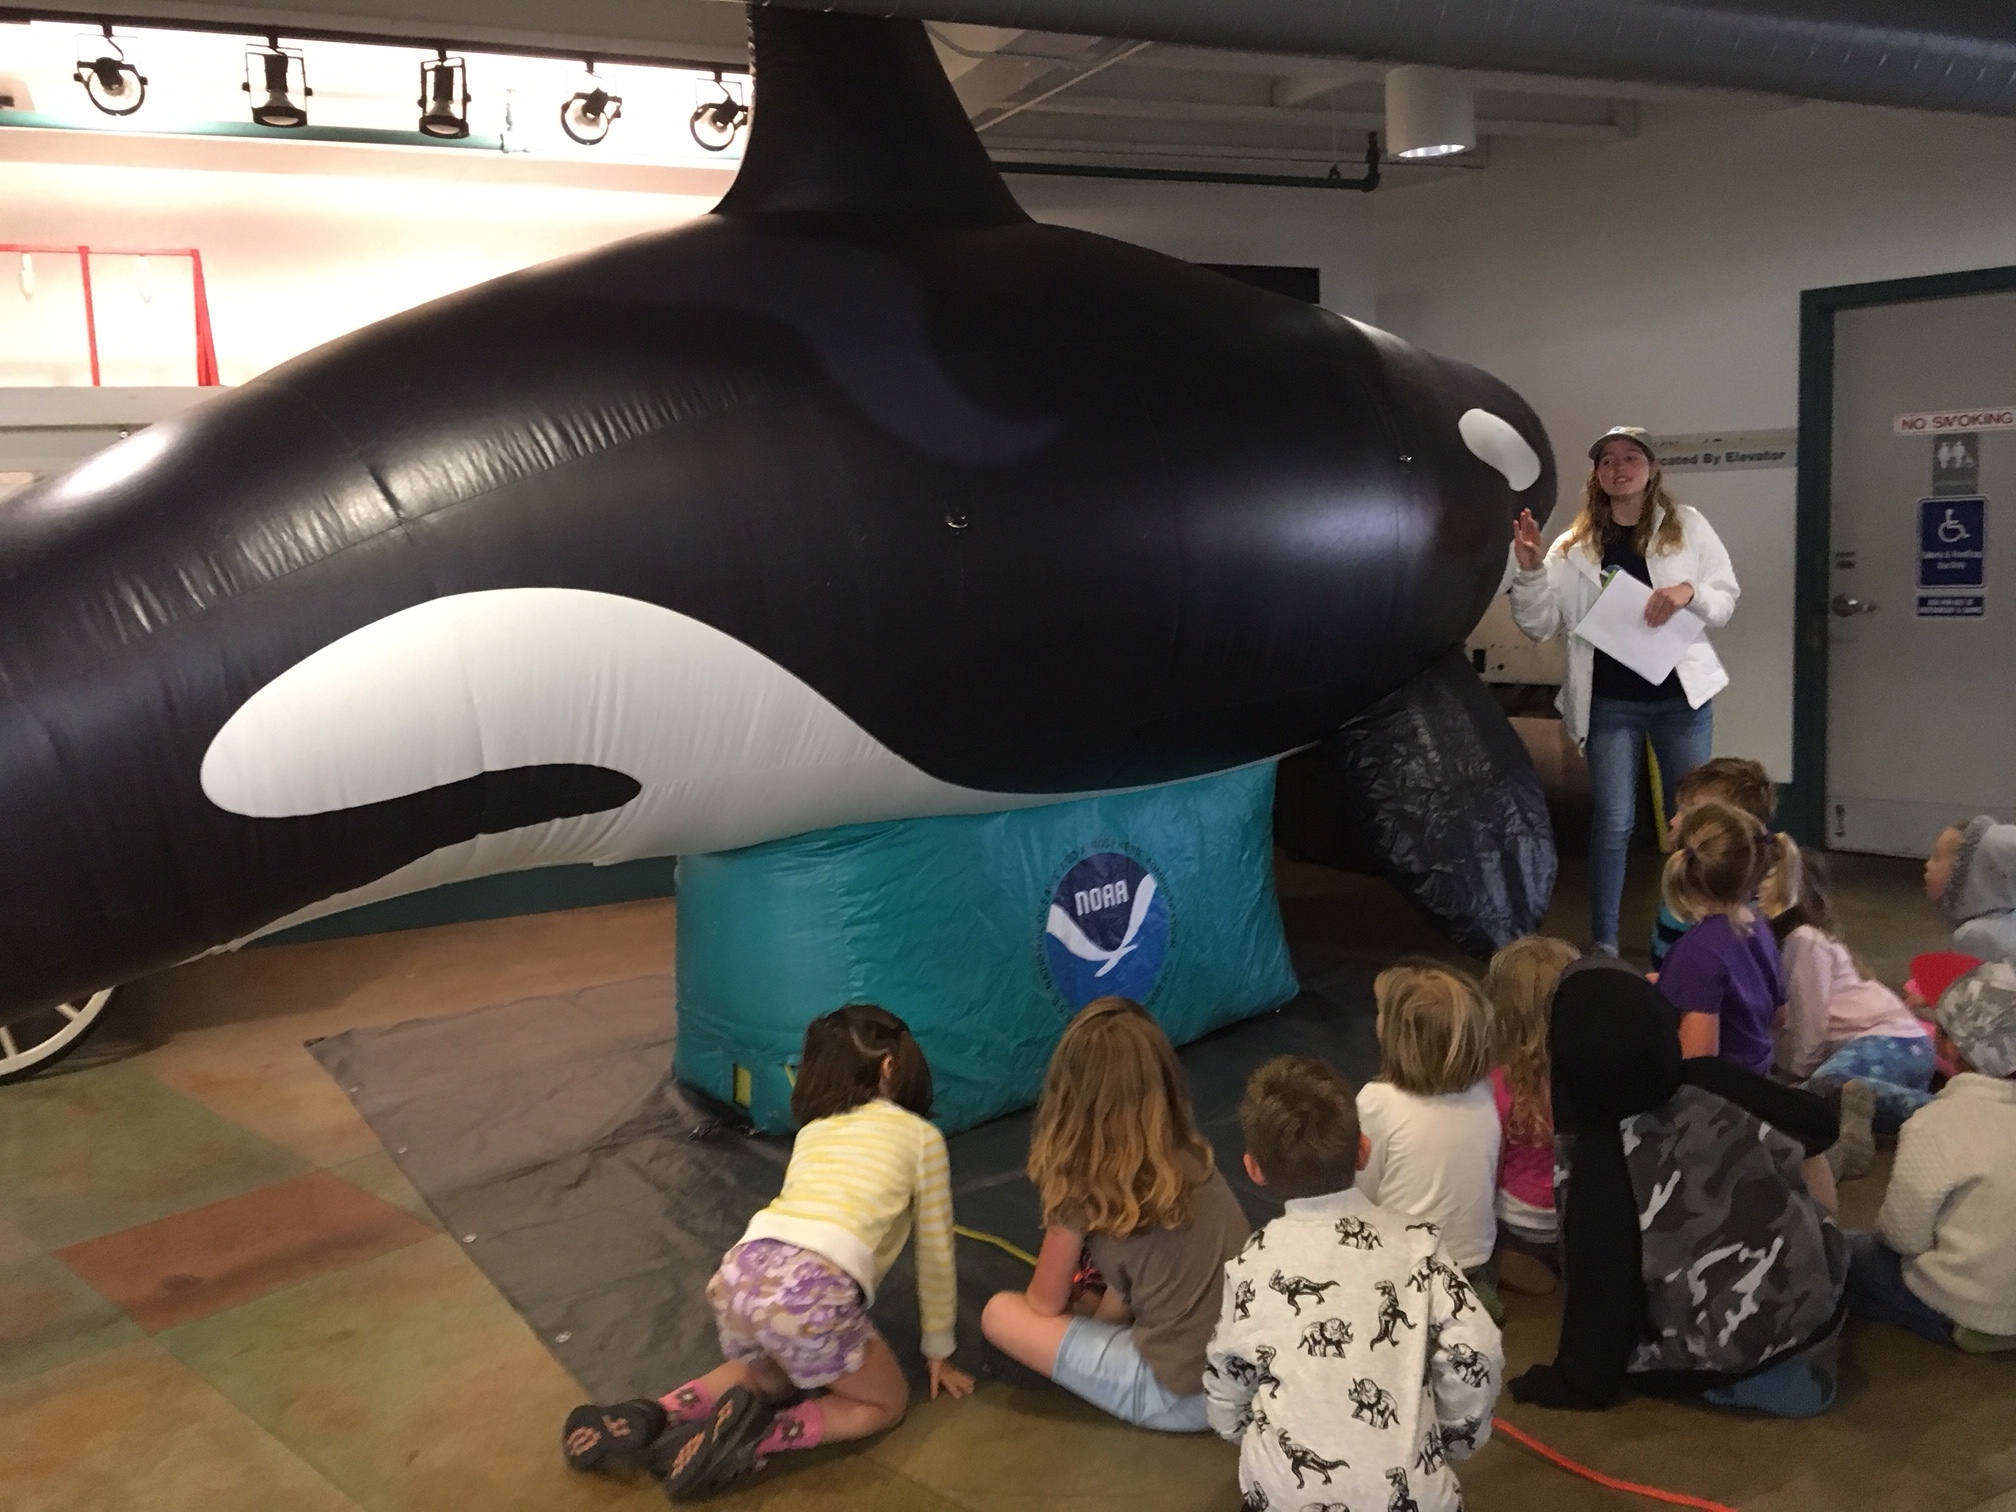 Julie Chase, Class of 2017 Hollings Scholar, educates campers about Mike, a life-size replica of a southern resident killer whale (J-26), pictured here, during her internship at the Olympic Coast National Marine Sanctuary in Port Angeles, Washington.